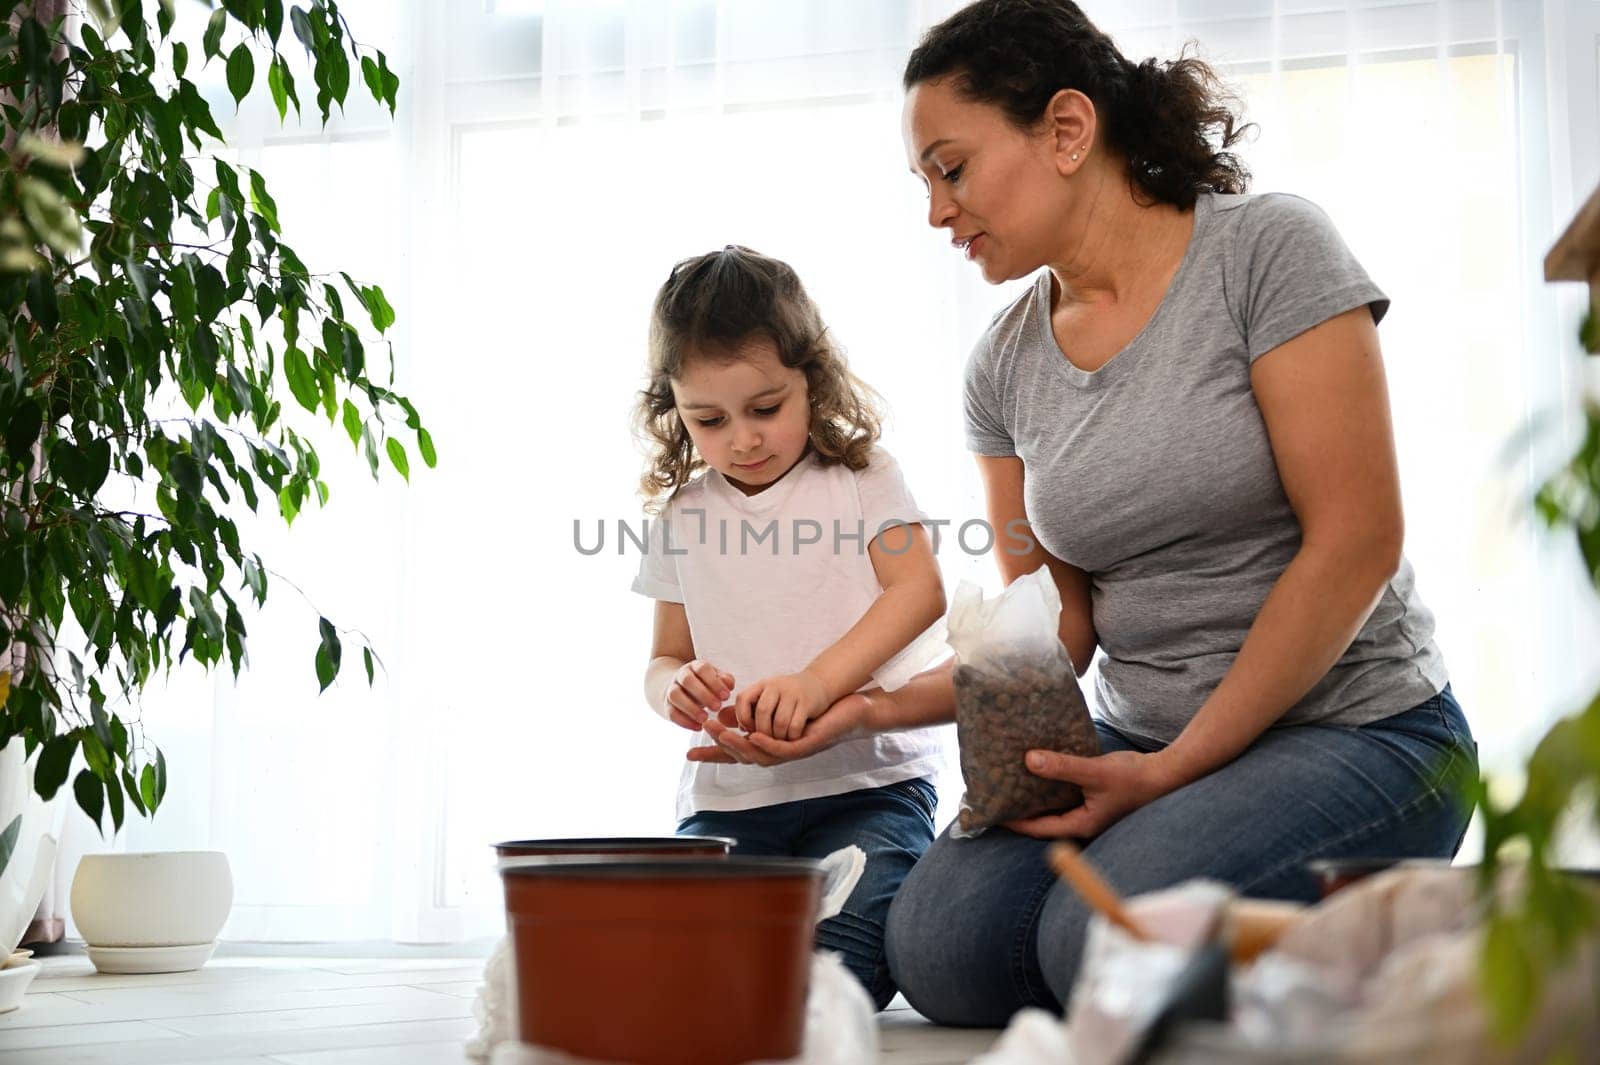 Loving mother and her lovely little girl taking care of houseplants, putting expanded clay into a pot while repotting or planting houseplants and seeds at springtime, enjoying together gardening hobby